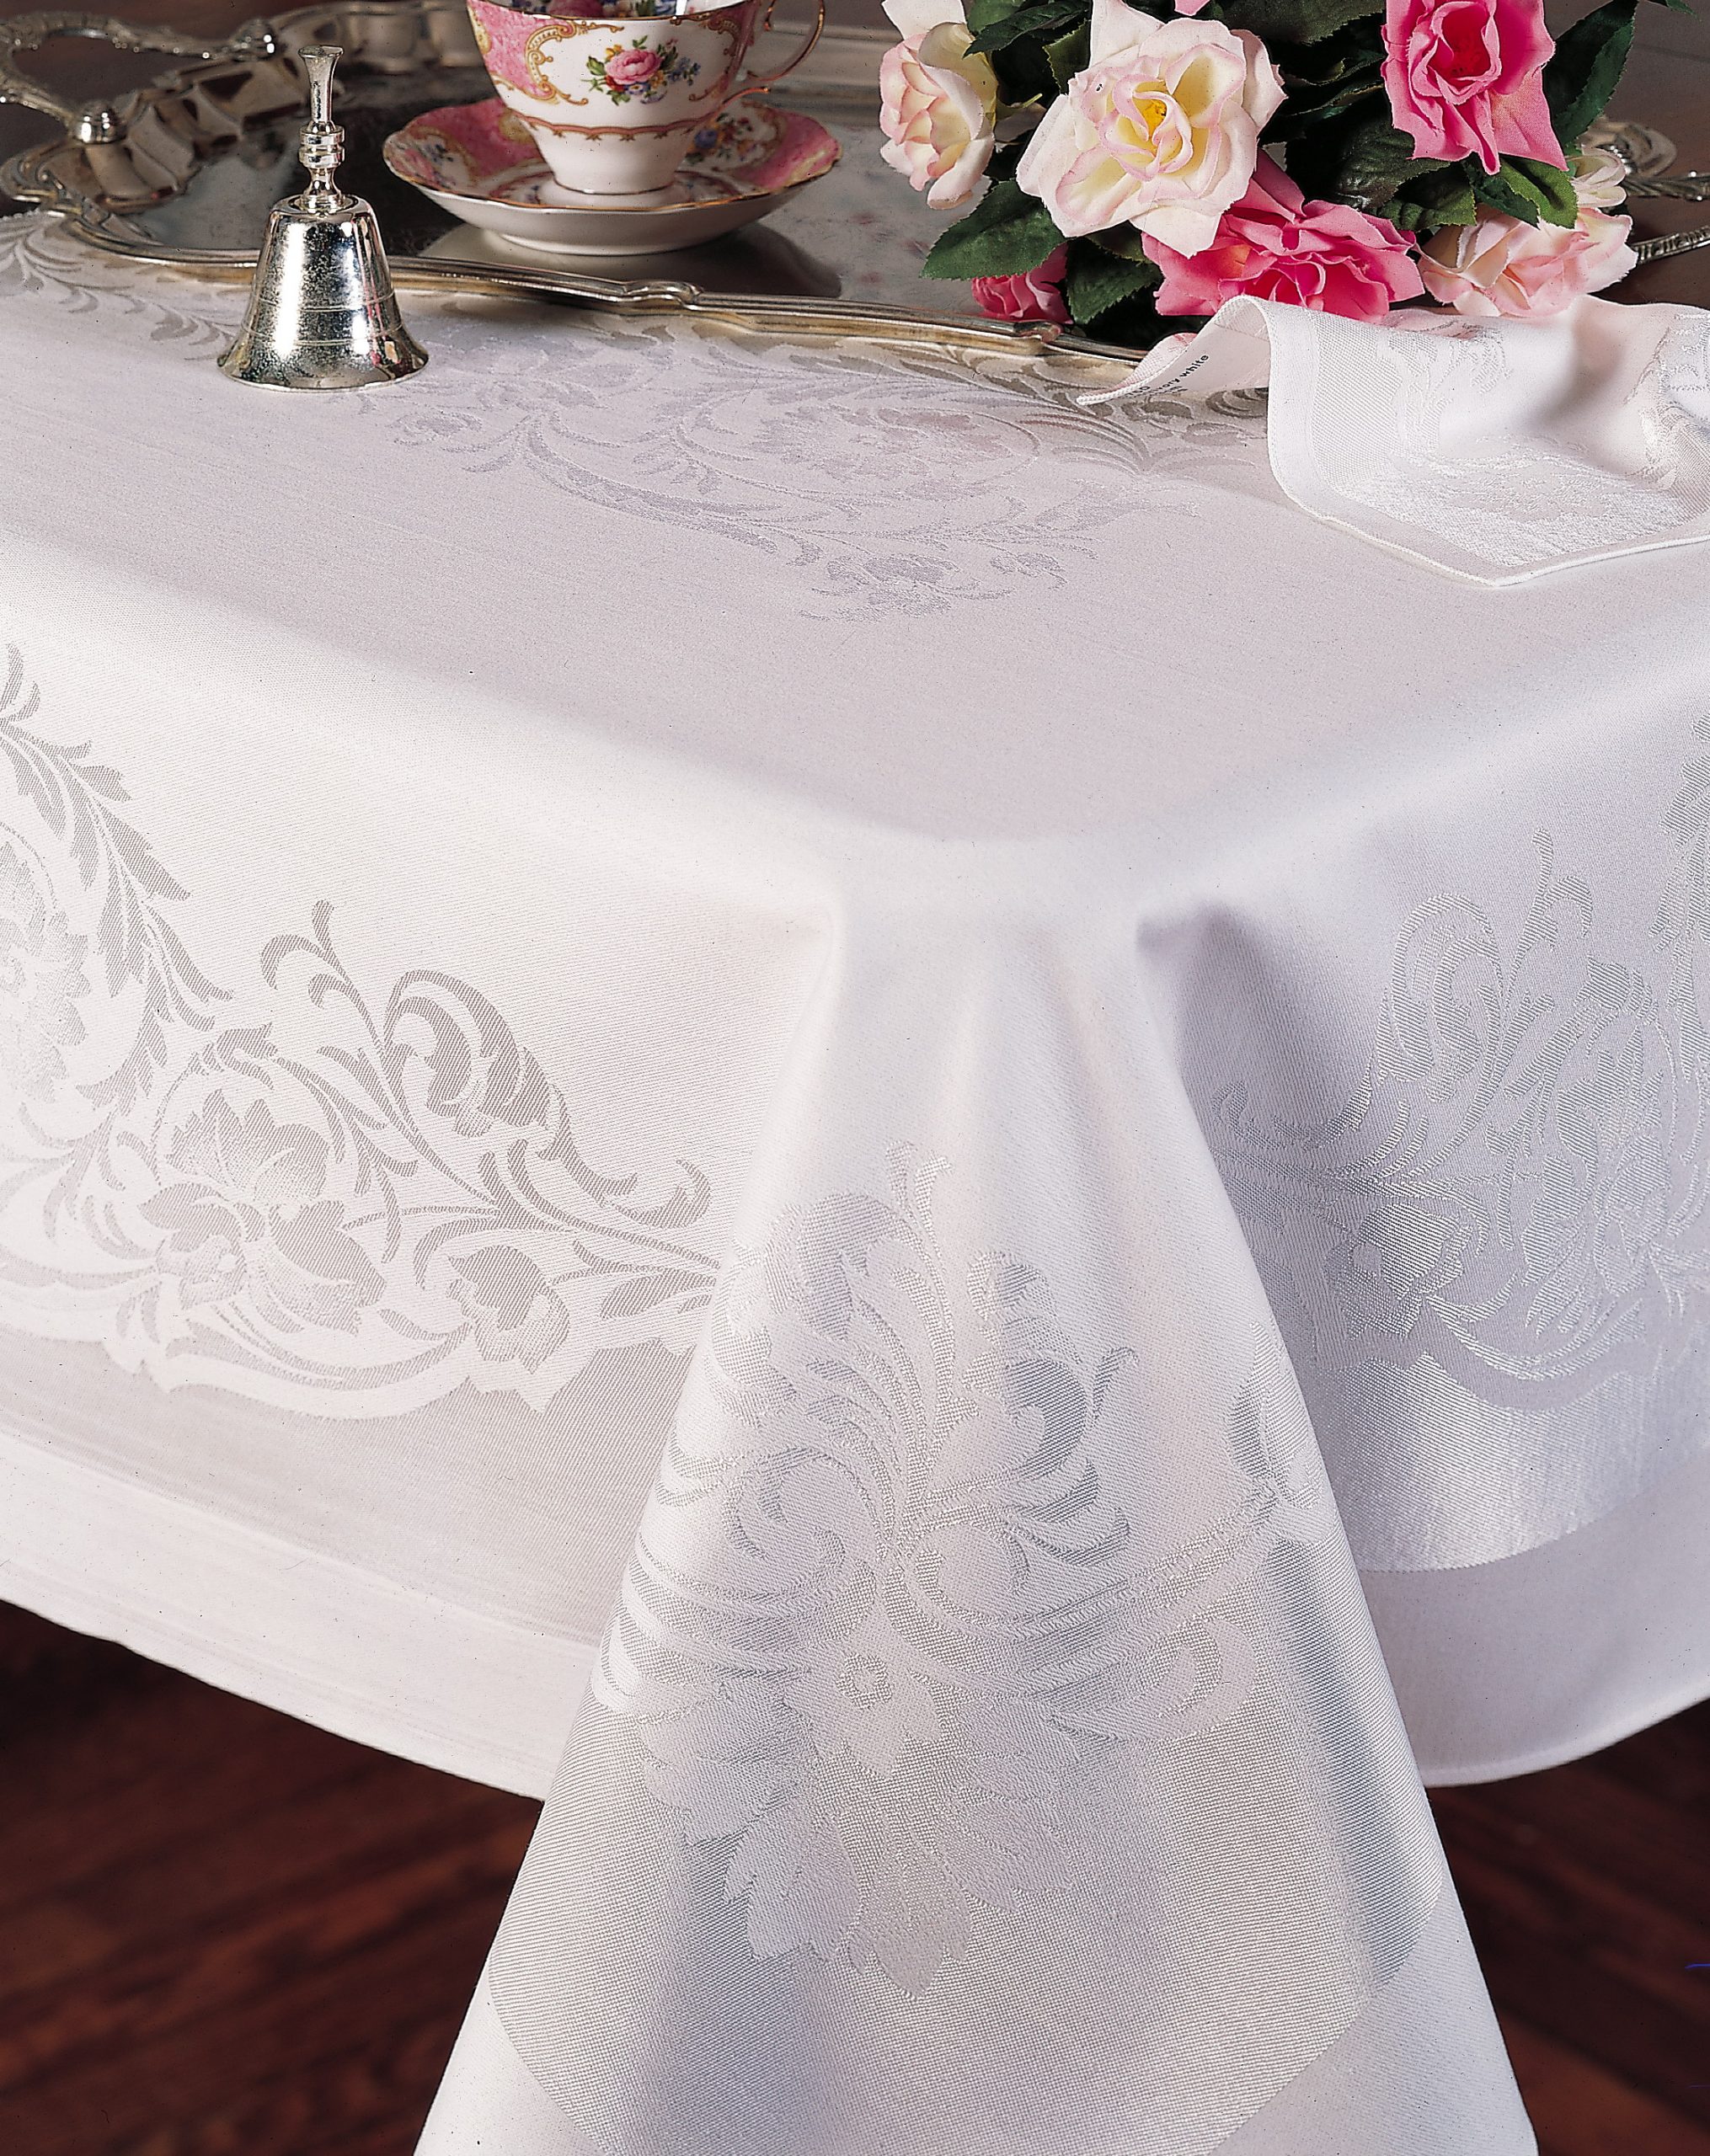 Details about   Floral Oval Tablecloth Table Runner Magnus Ecru-Gold two size show original title 